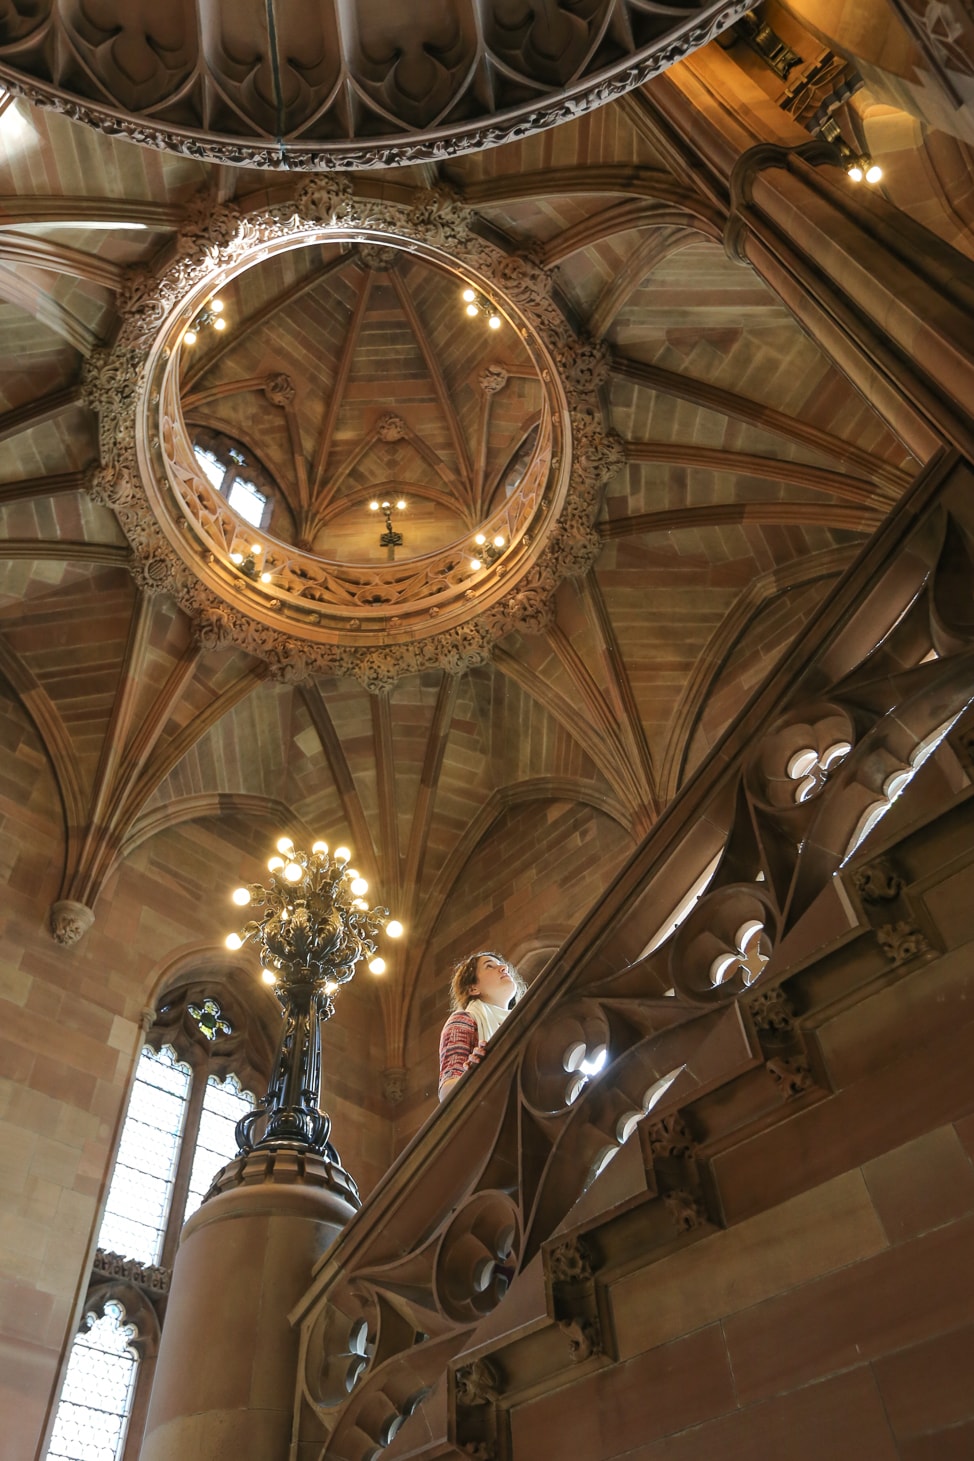 John Rylands Library in Manchester, England | Built in the 1890s, the John Rylands Library is widely regarded as one of the most beautiful libraries in the world; both the building and its collections are of outstanding international significance.